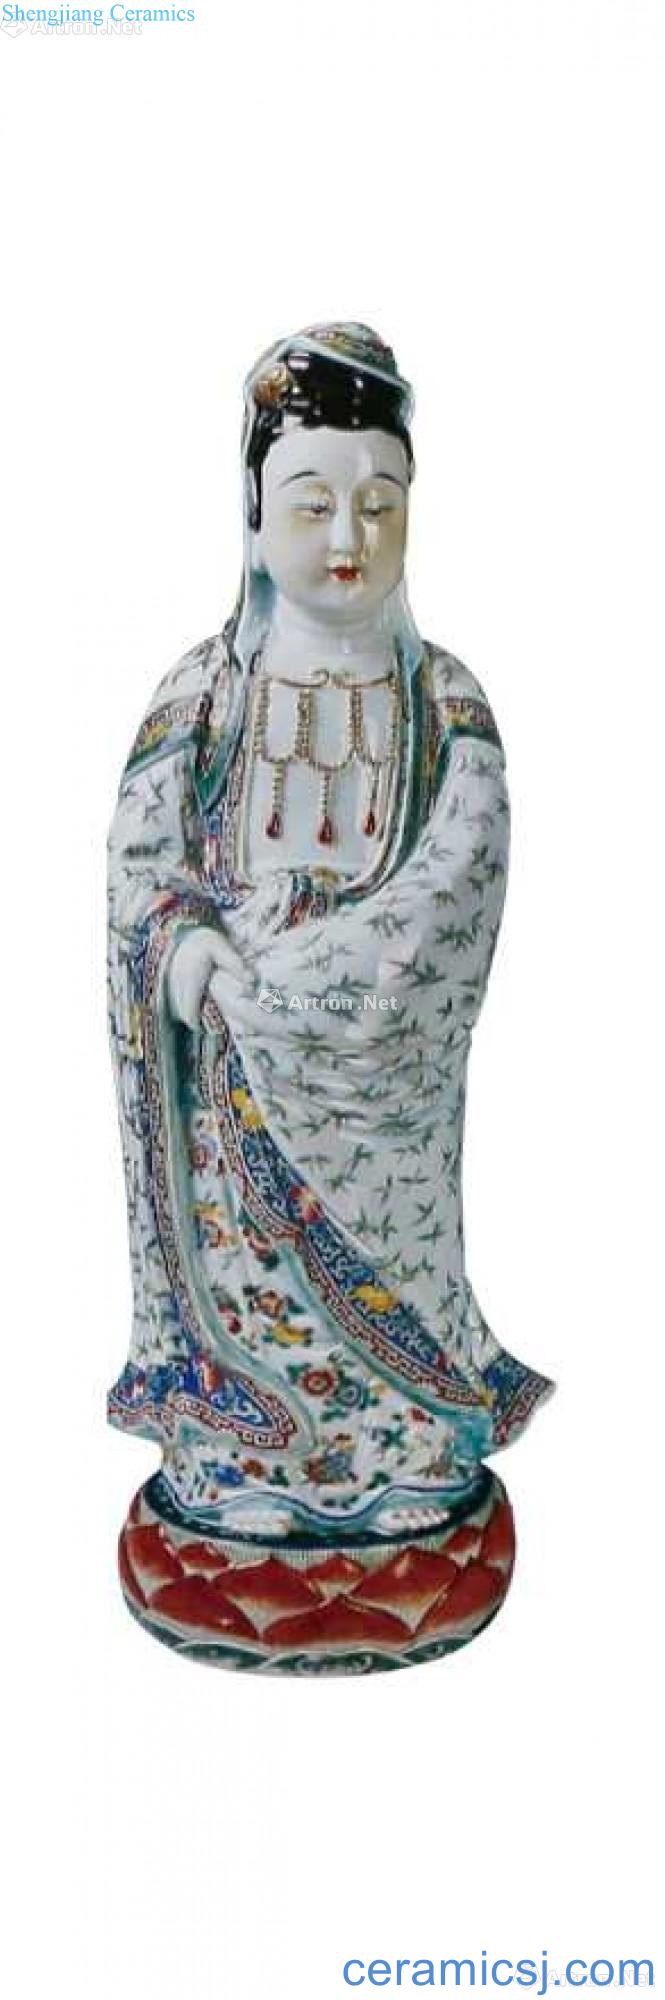 Pastel guanyin stands resemble